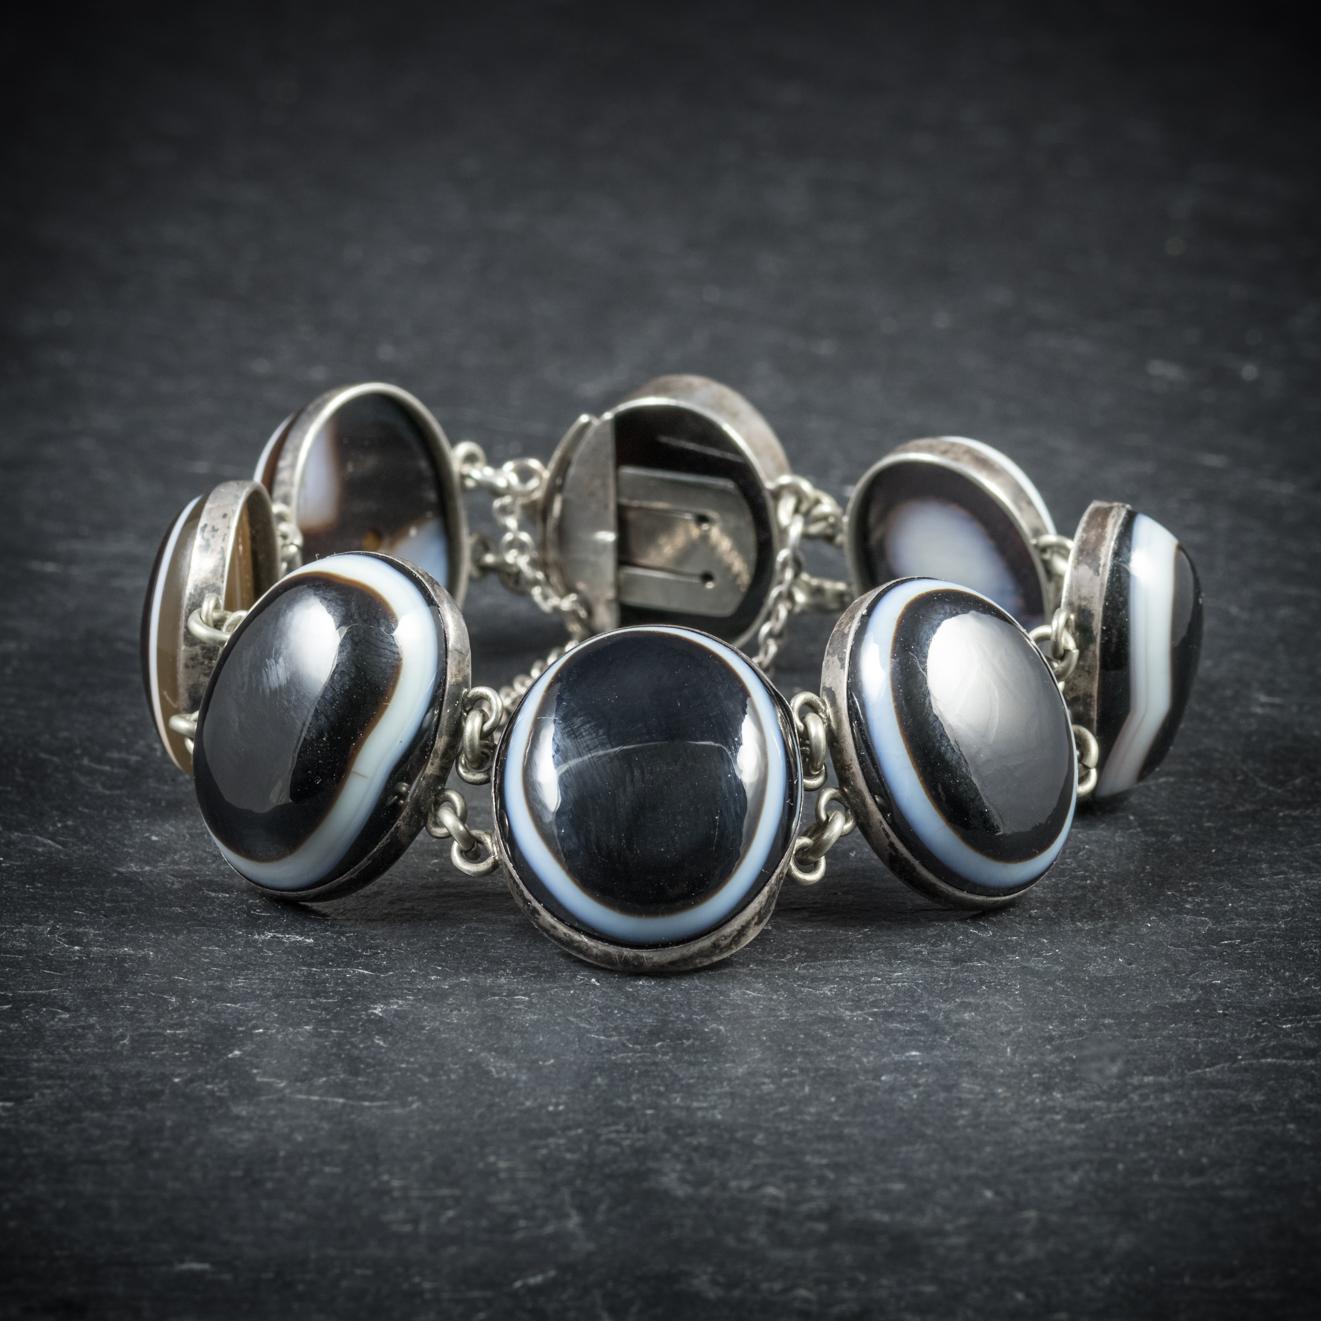 This beautiful antique Bullseye Agate bracelet is Victorian, Circa 1900

The bracelet comprises of eight polished Bullseye Agates which are smooth to the touch and have beautiful patterning 

All set in Silver and complete with a secure clasp and